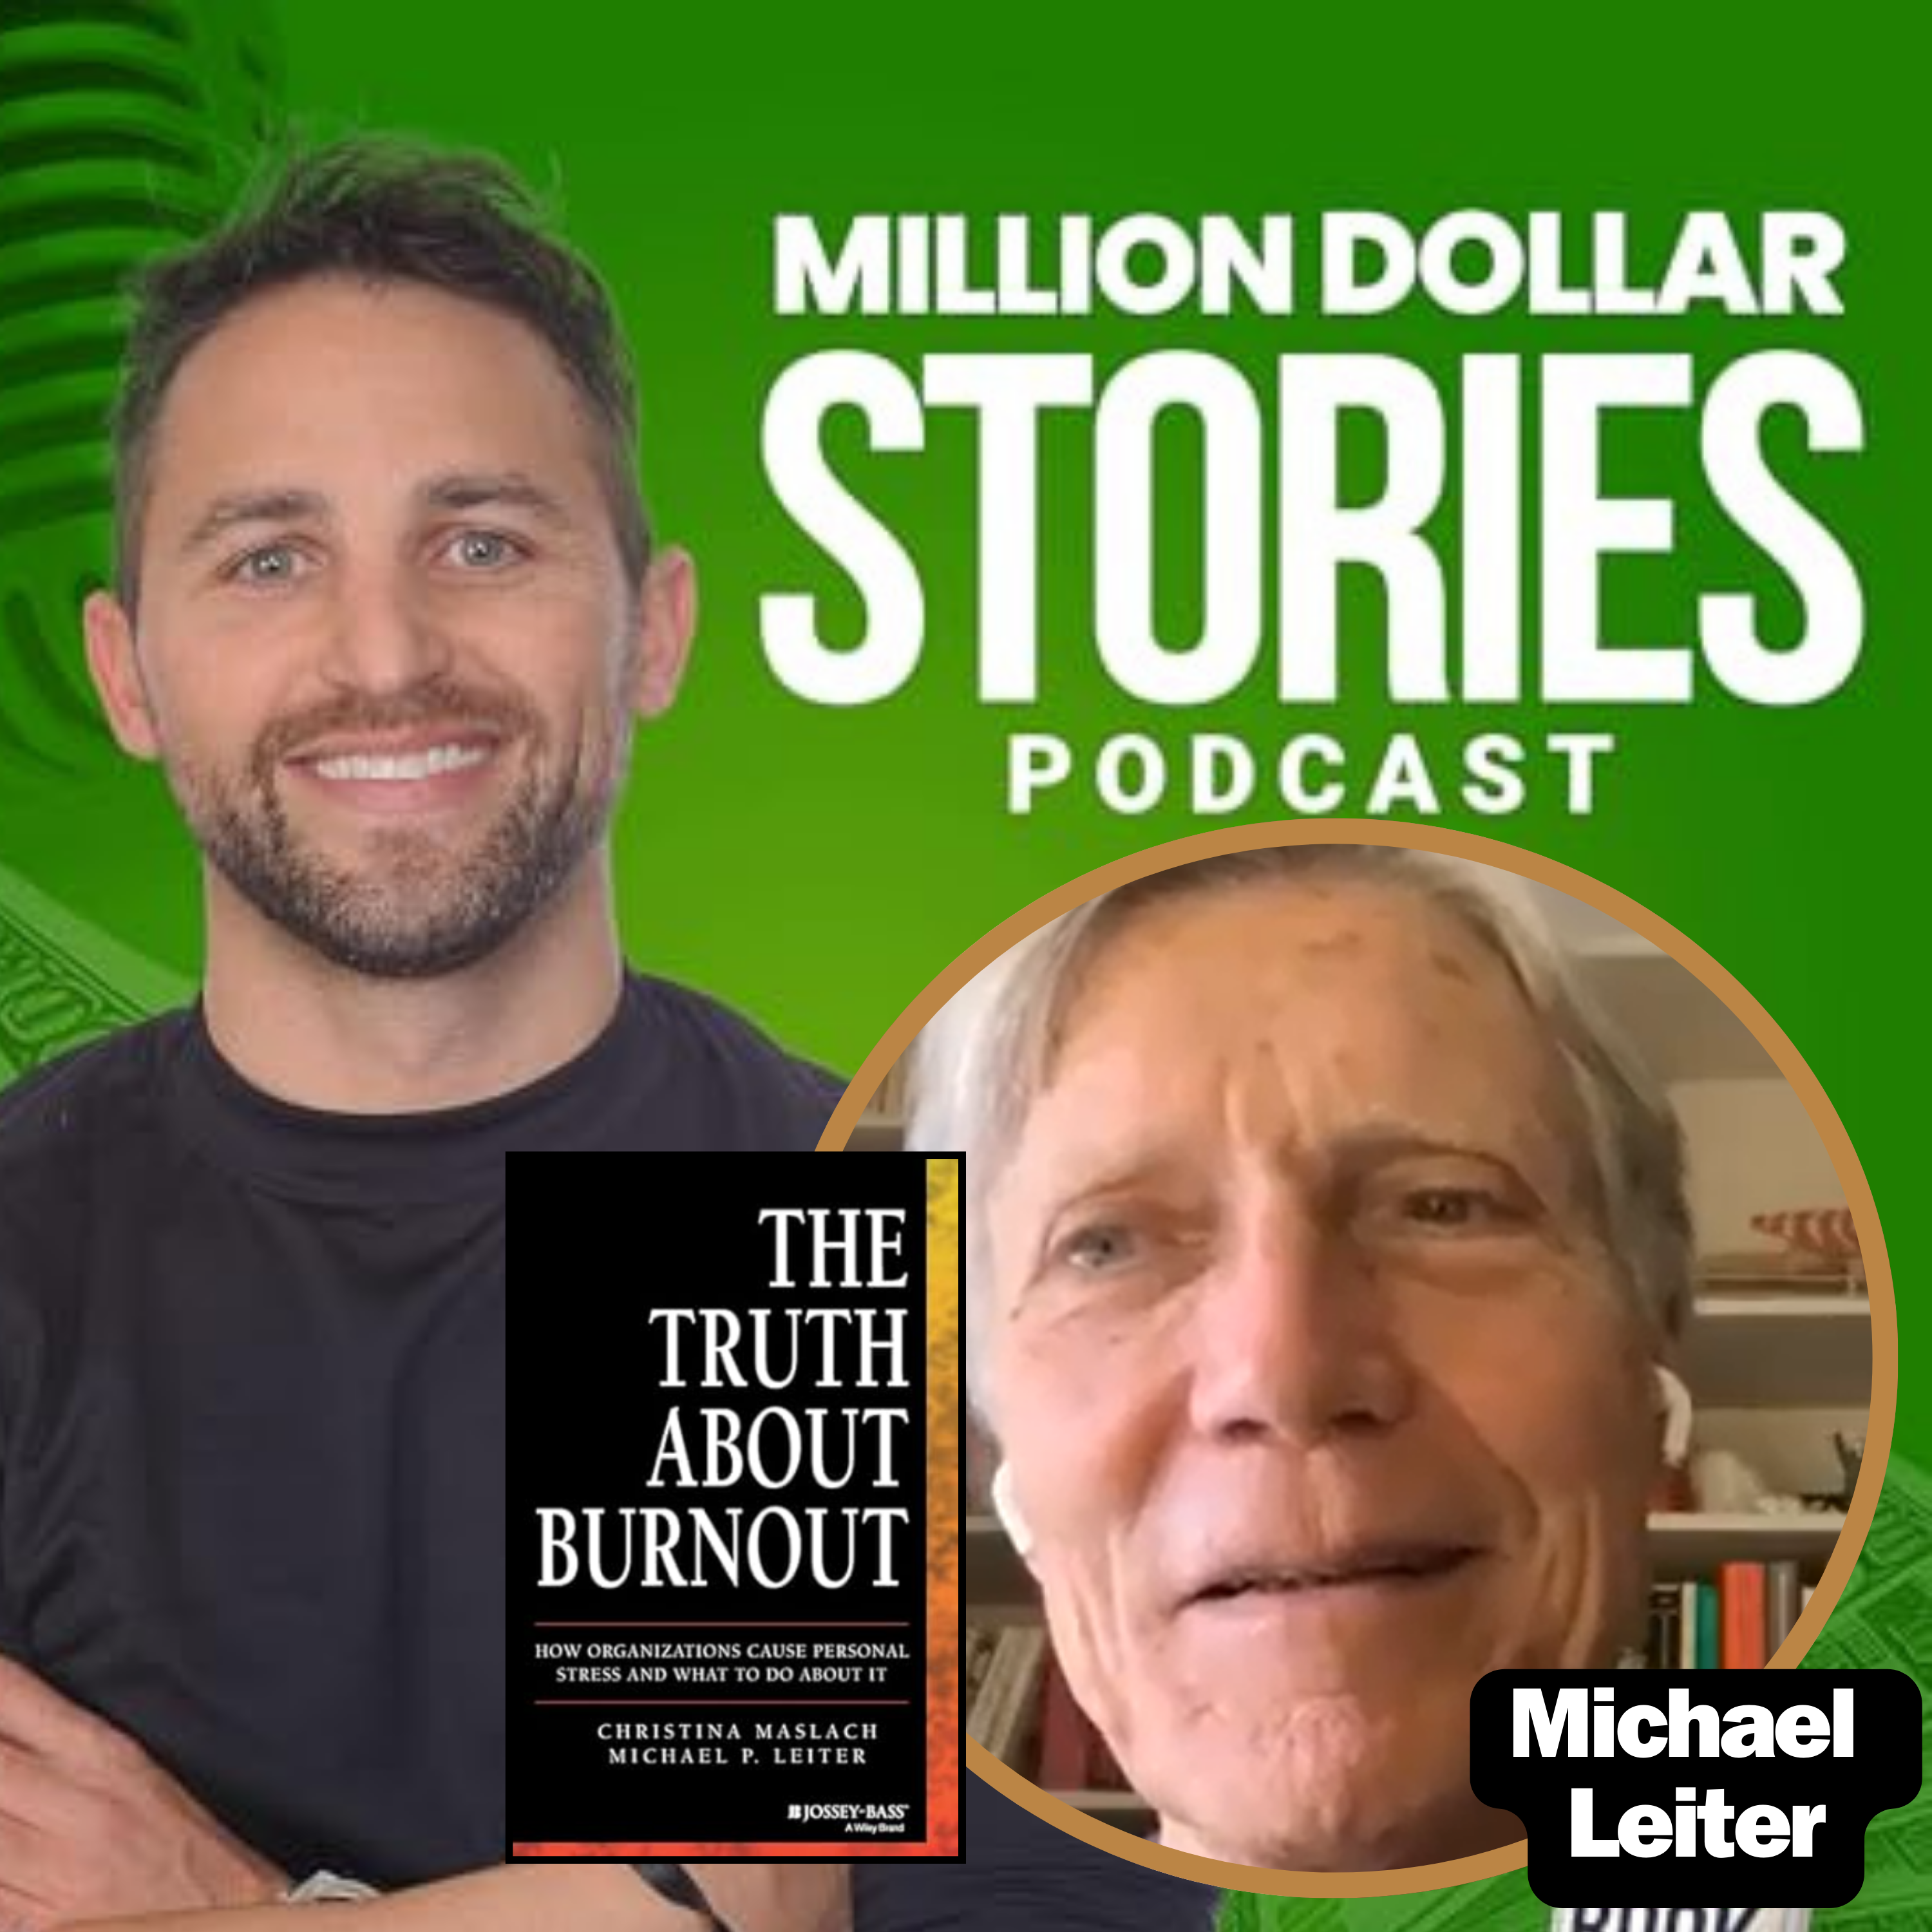 Michael Leiter – Author of “The Truth About Burnout”